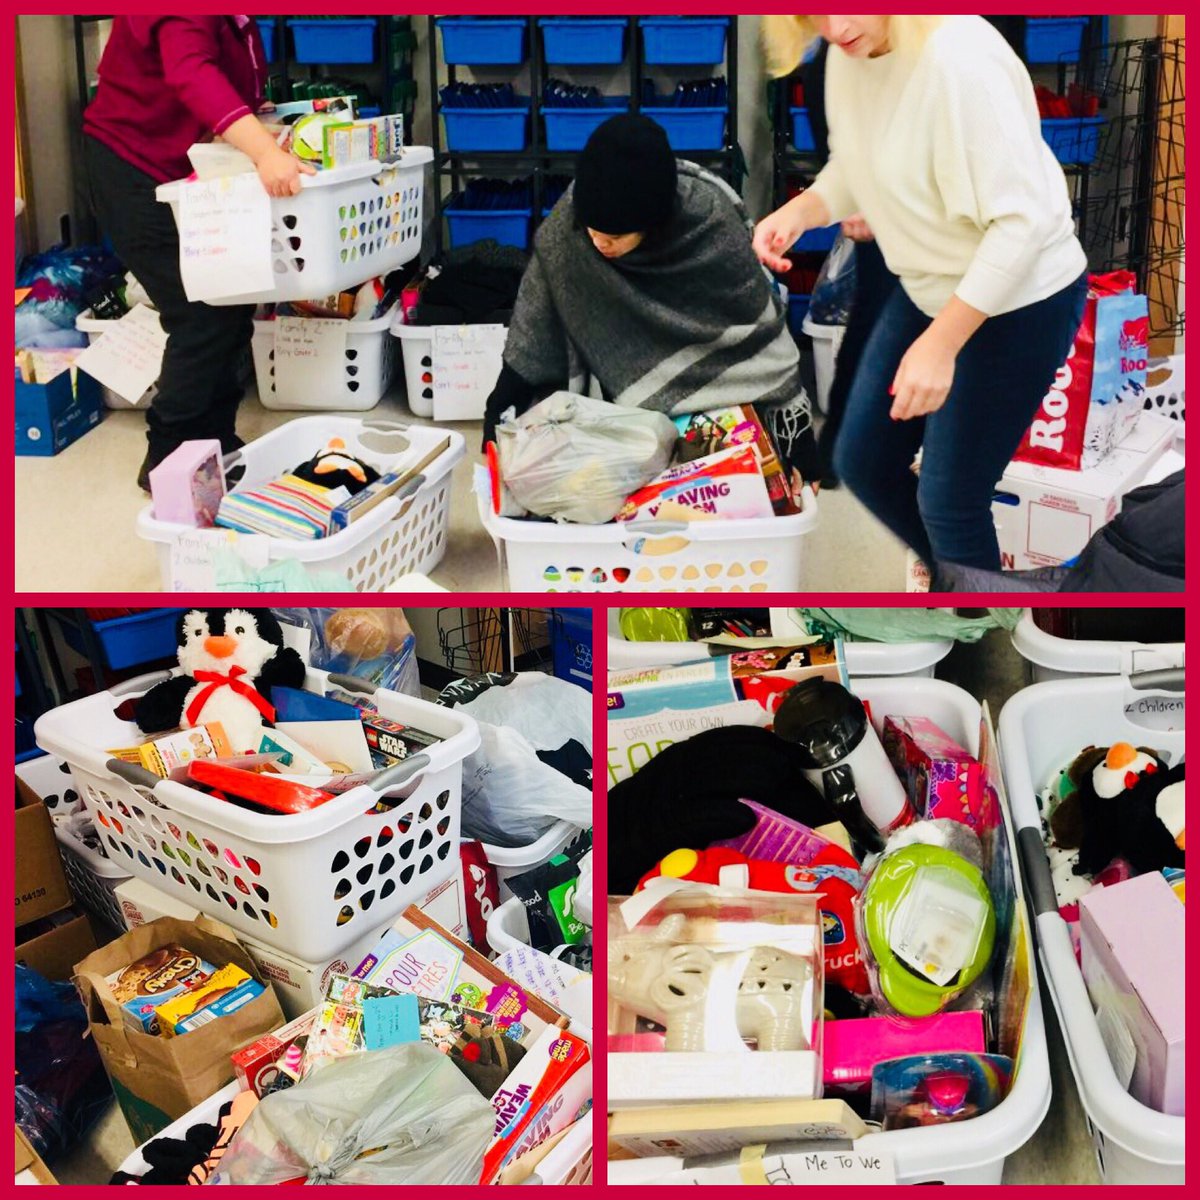 Thank you to all of @Agnesbears Partners including our Community Outreach Committee for making this happen, winter gift hampers filled up for 22 of our families.